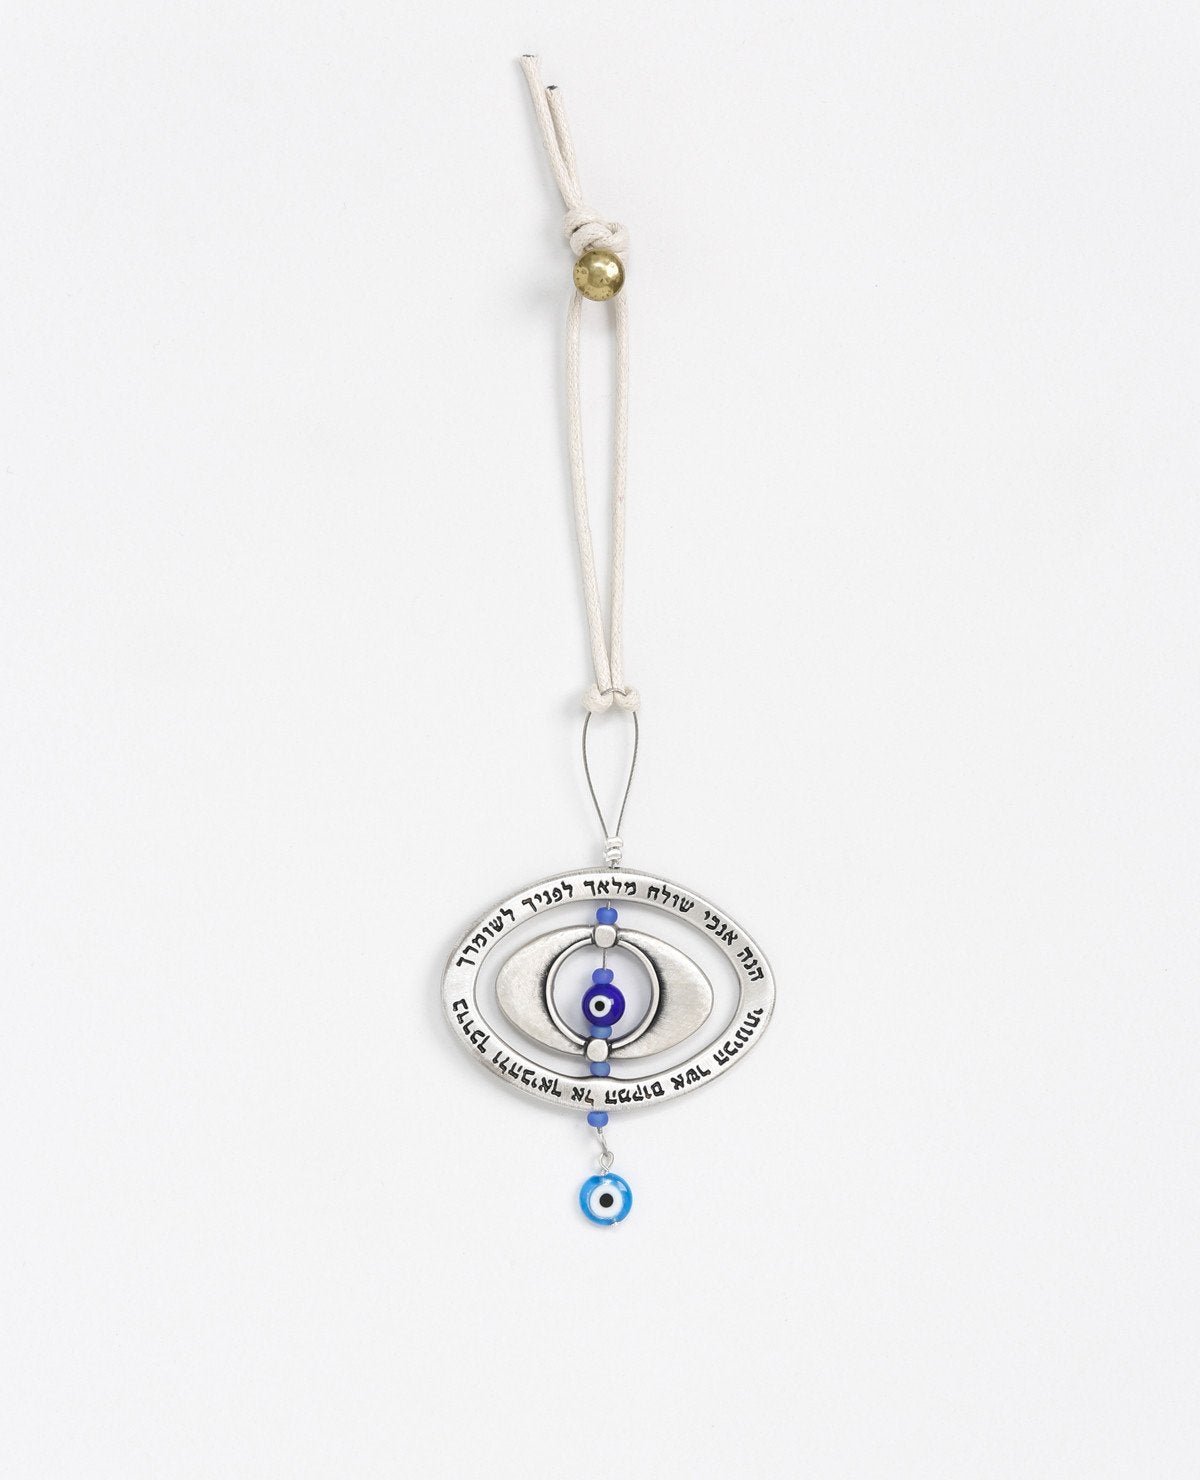 Sterling silver plated car pendant with blue beads.  Length: 7 cm  Width: 6 cm